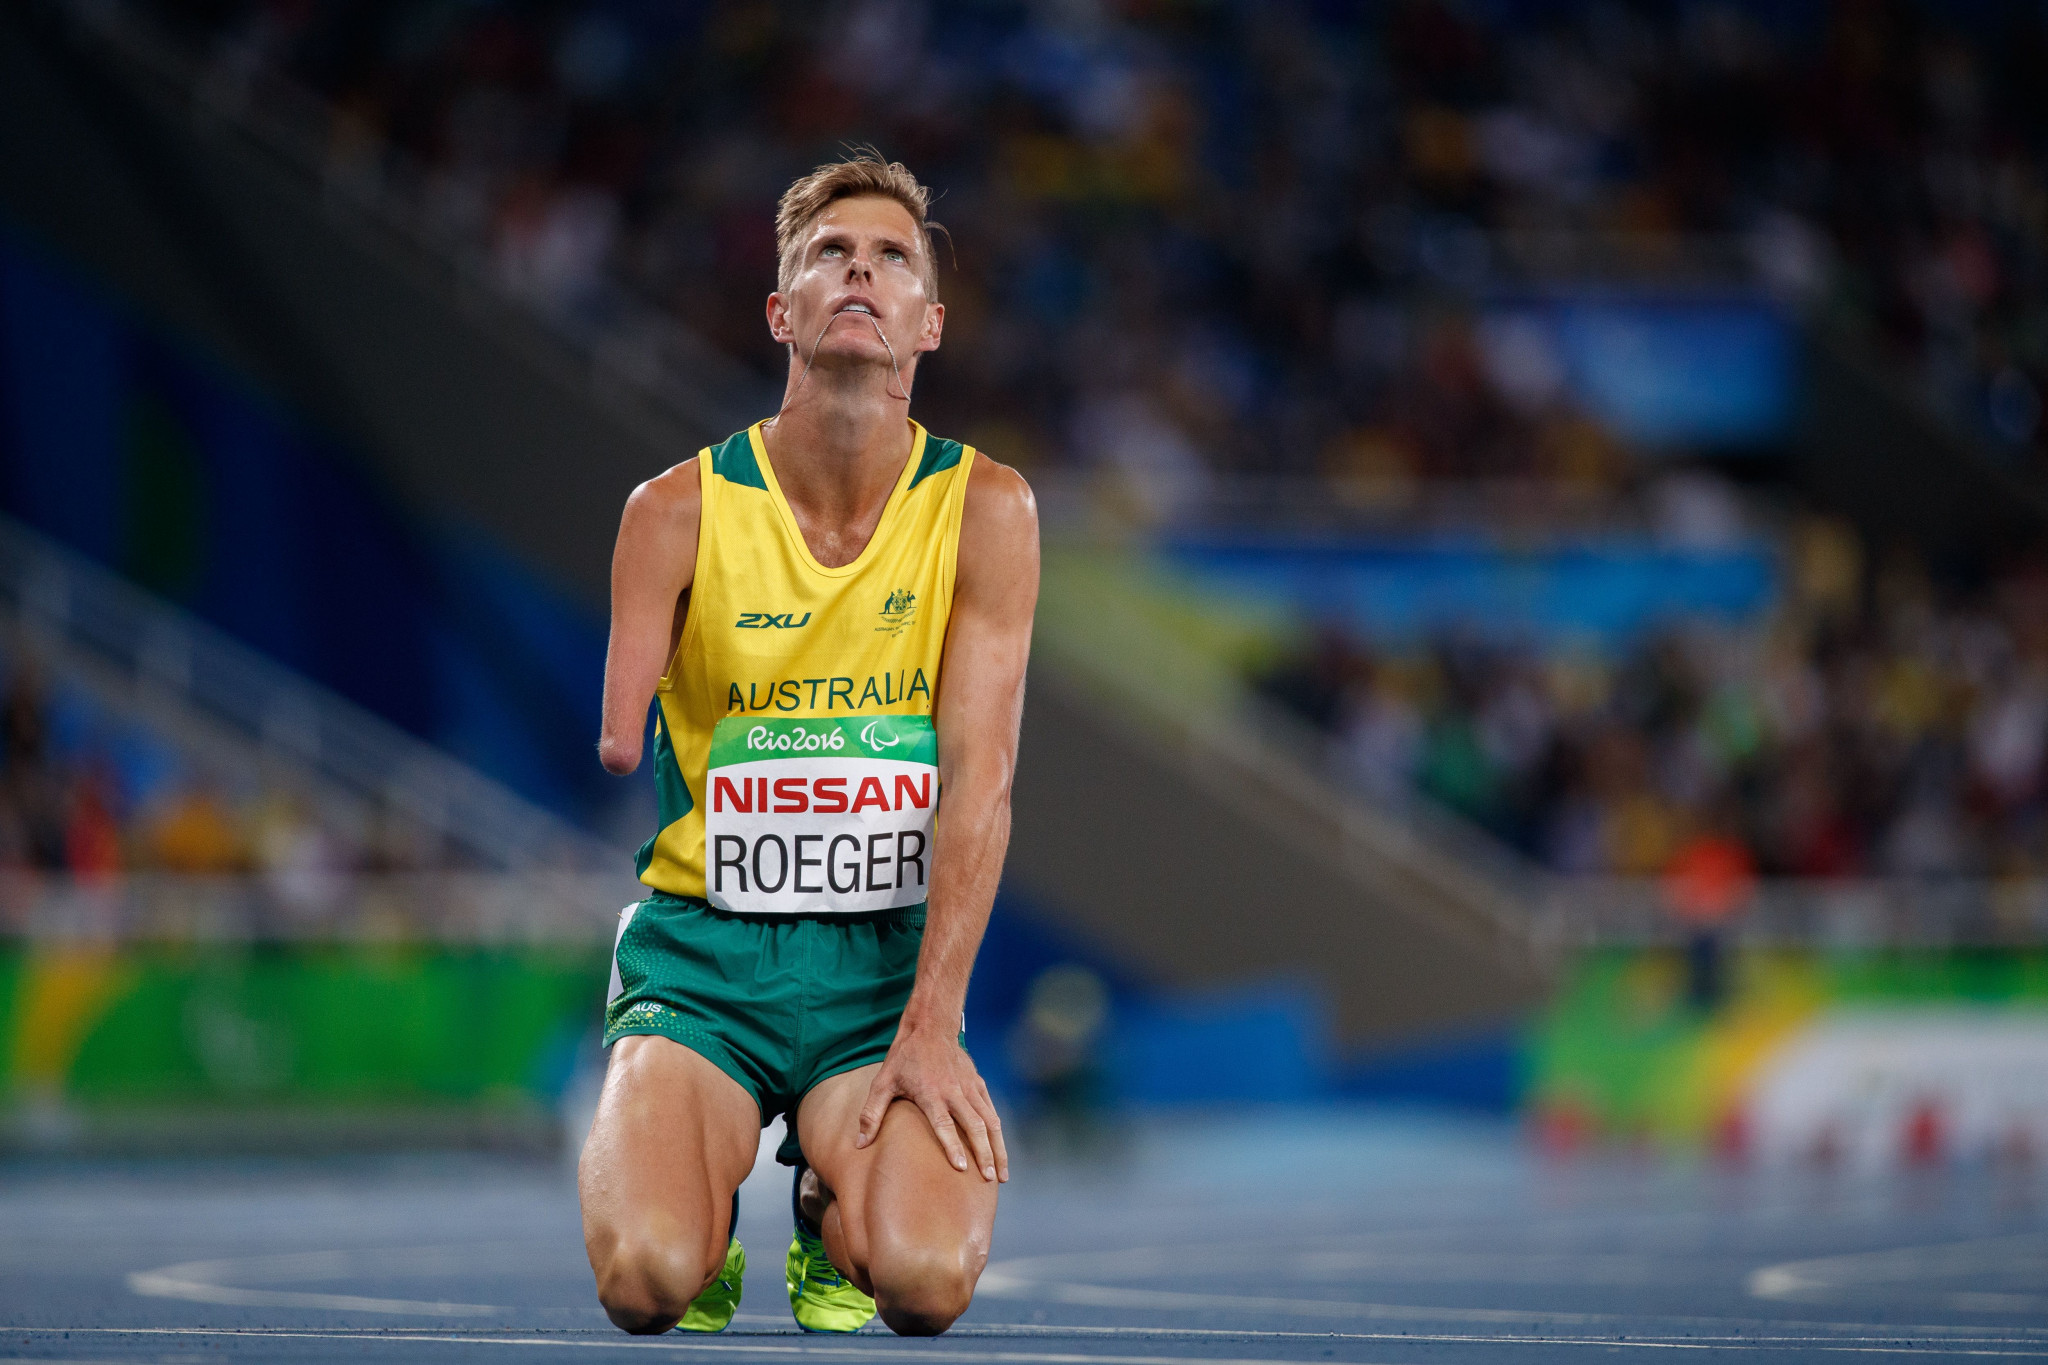 Middle-distance runner Roeger aiming for gold at World Para Marathon Championships